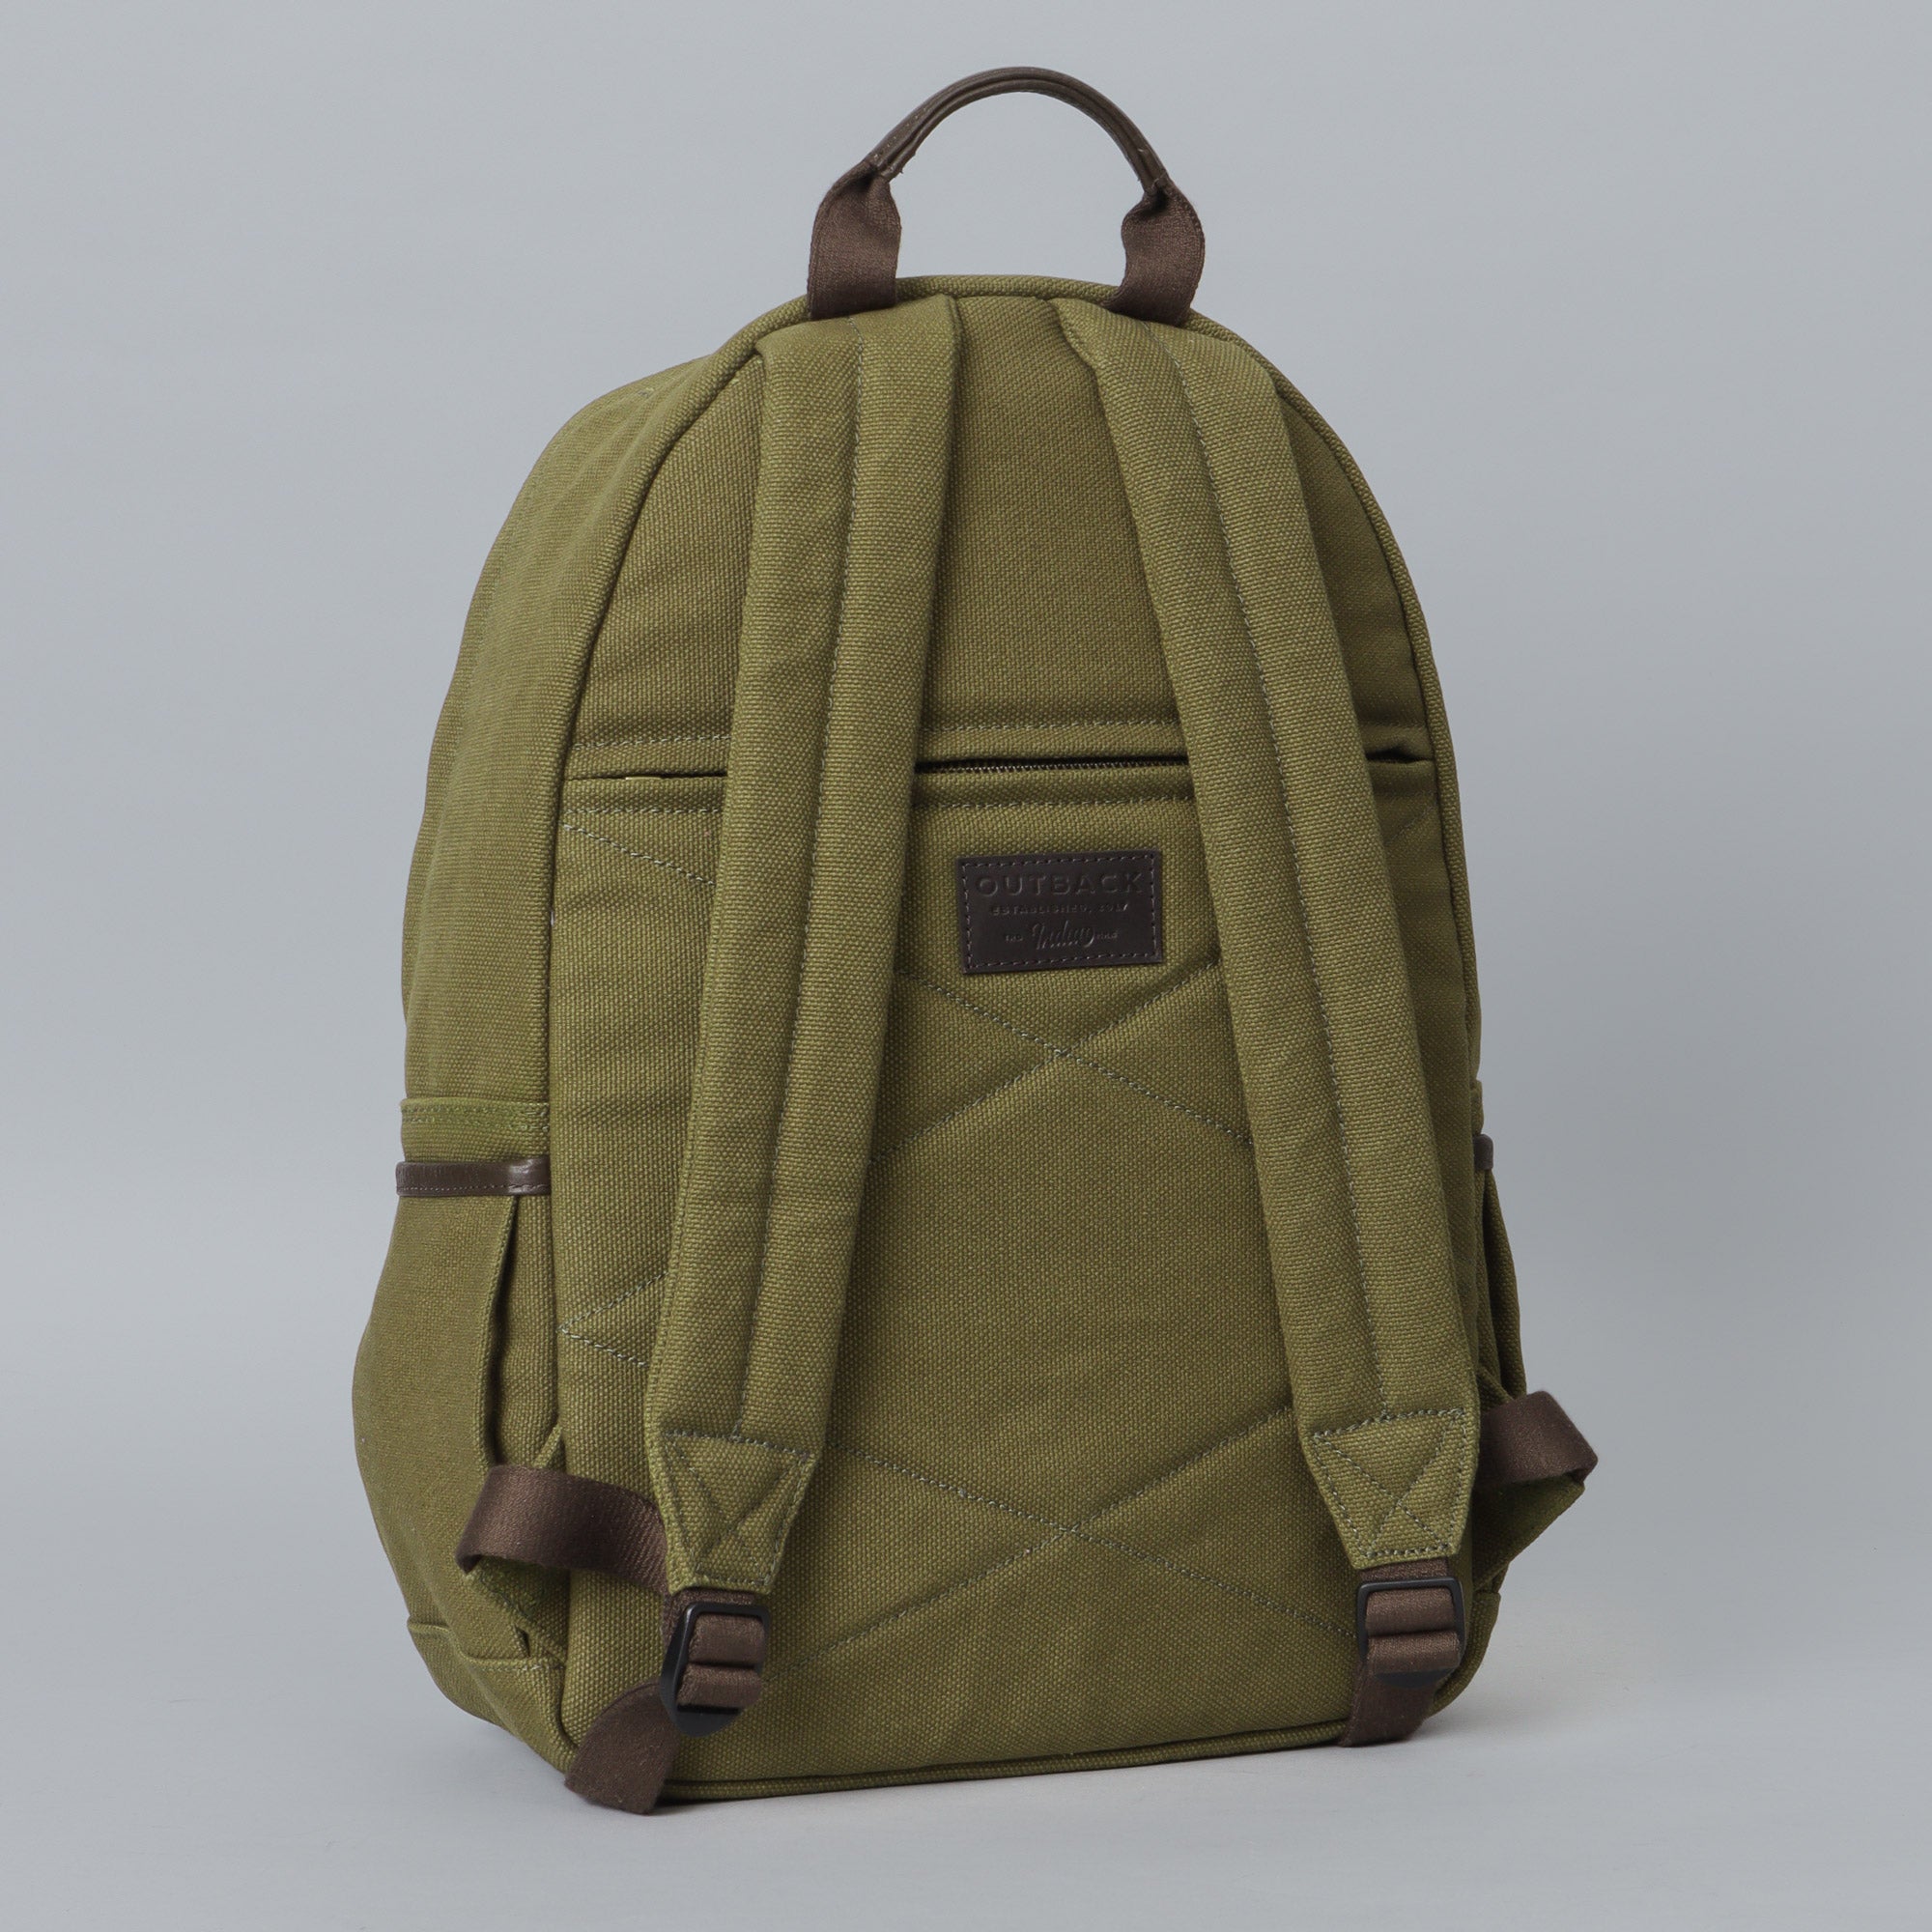 Green canvas backpack for women